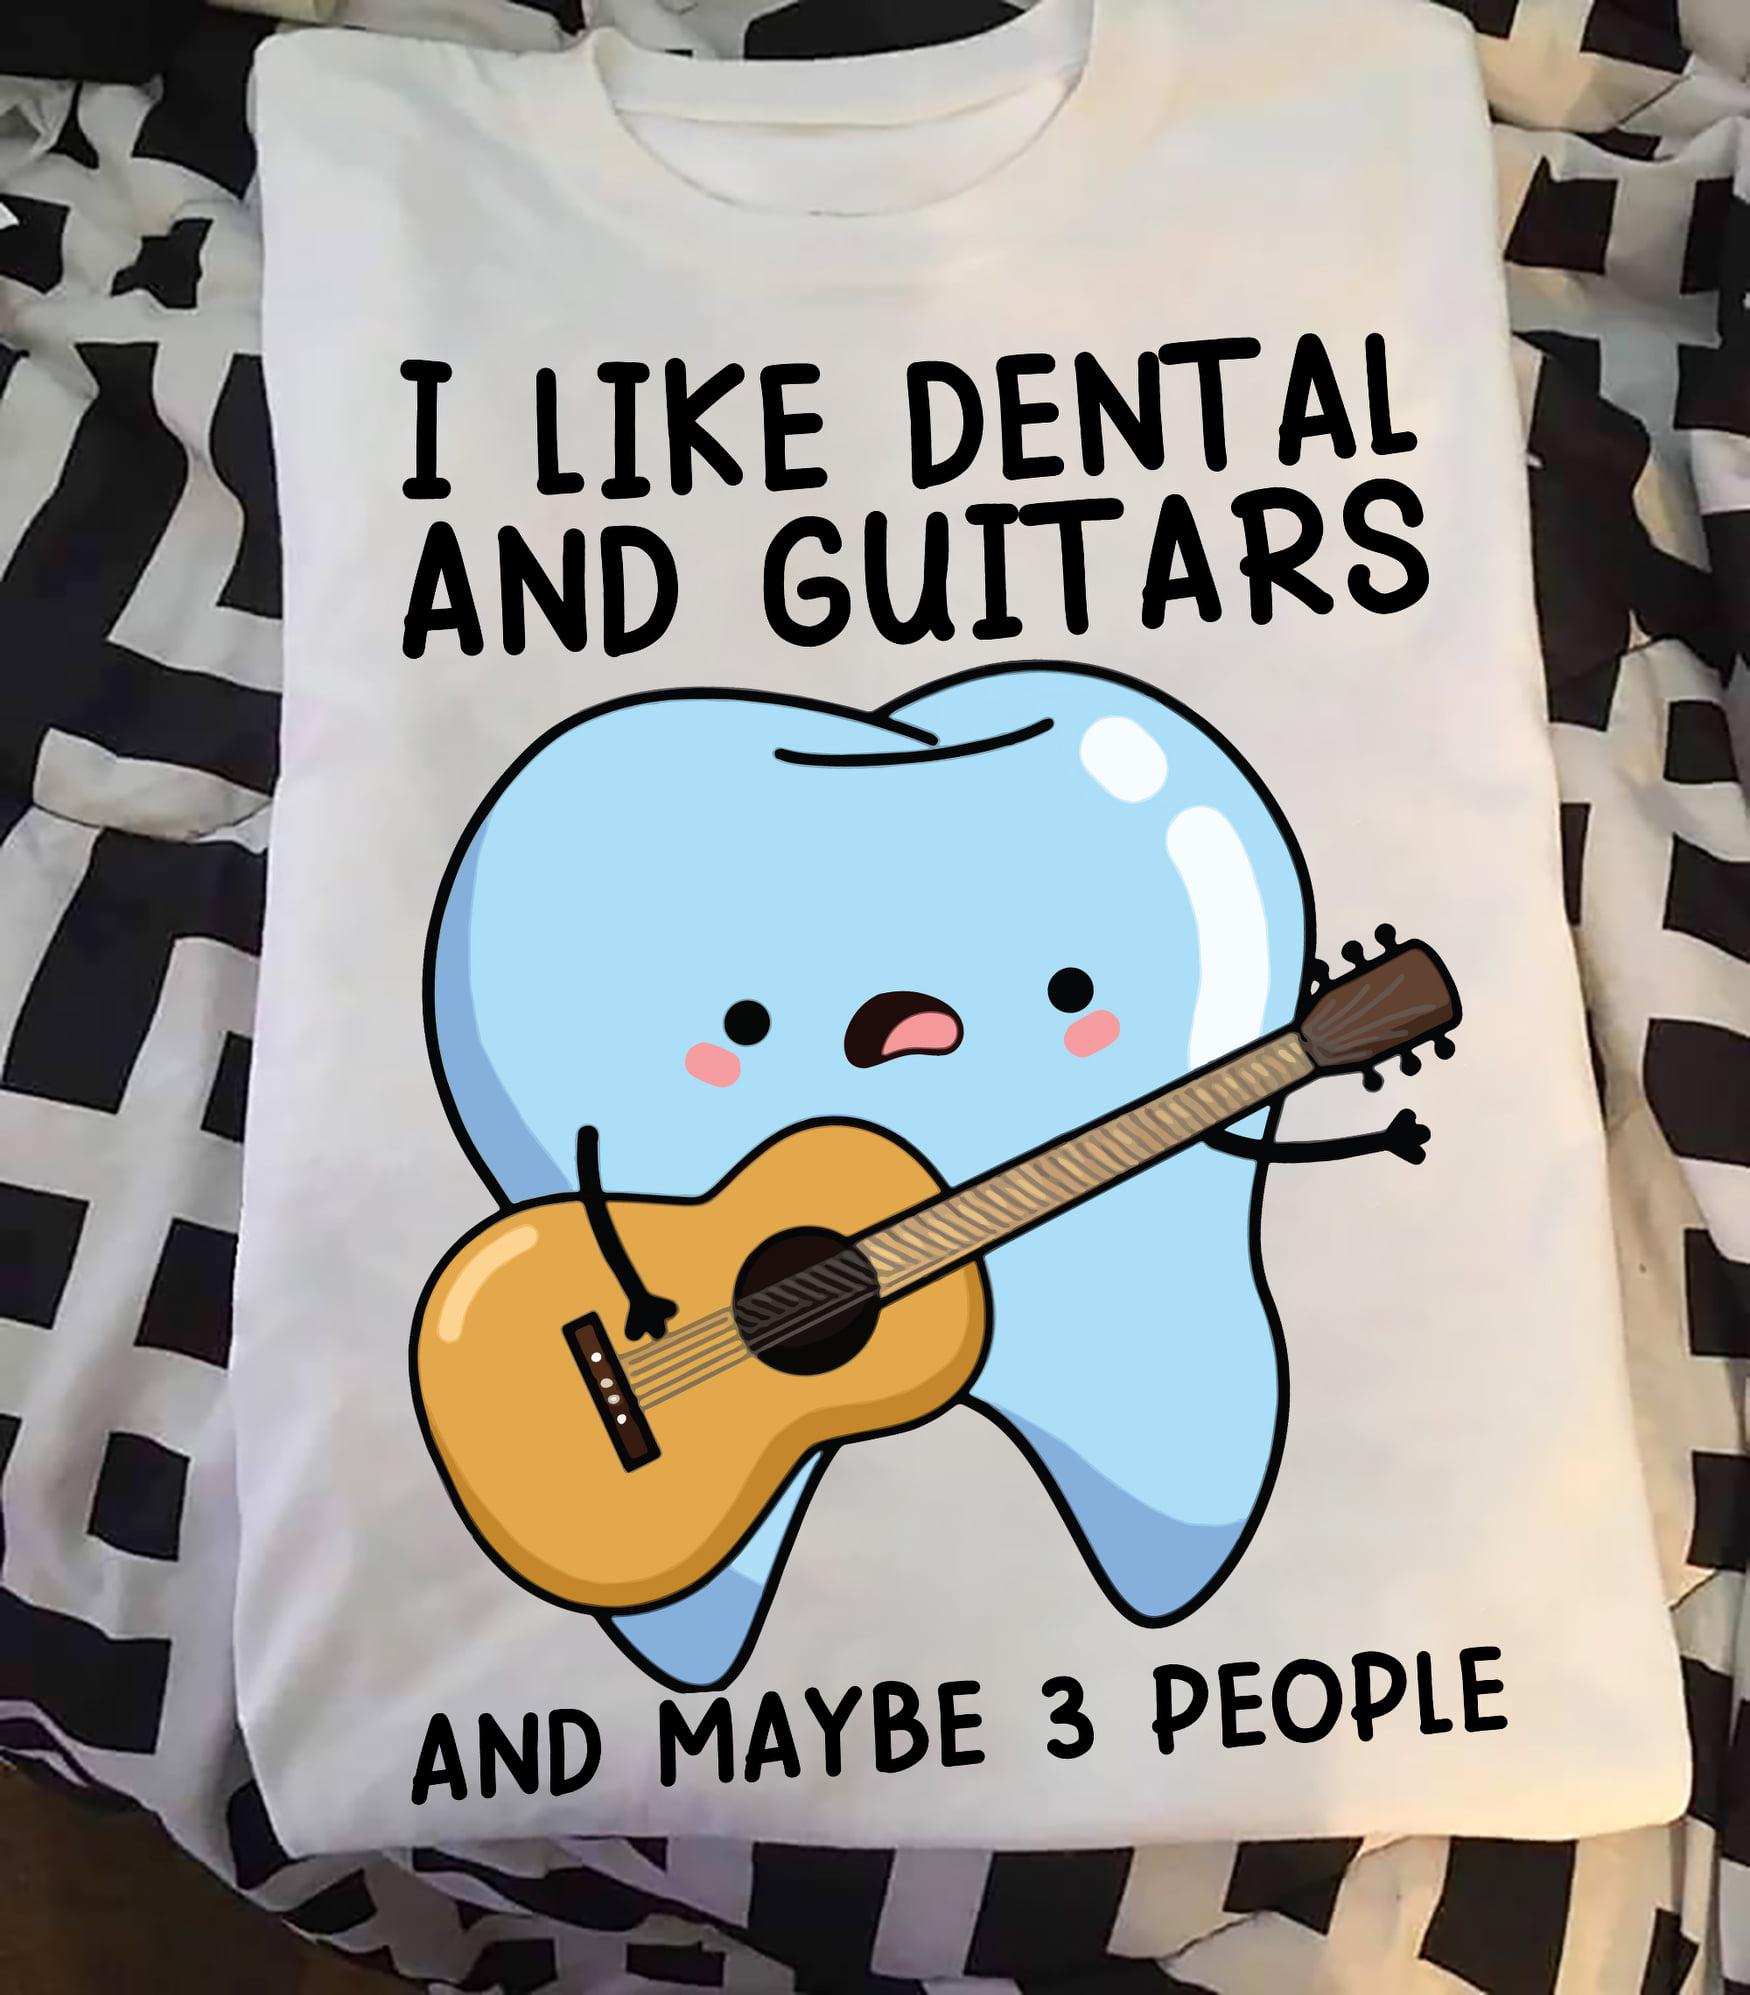 I like dental and guitars and maybe 3 people - Tooth playing guitar, T-shirt for guitarist